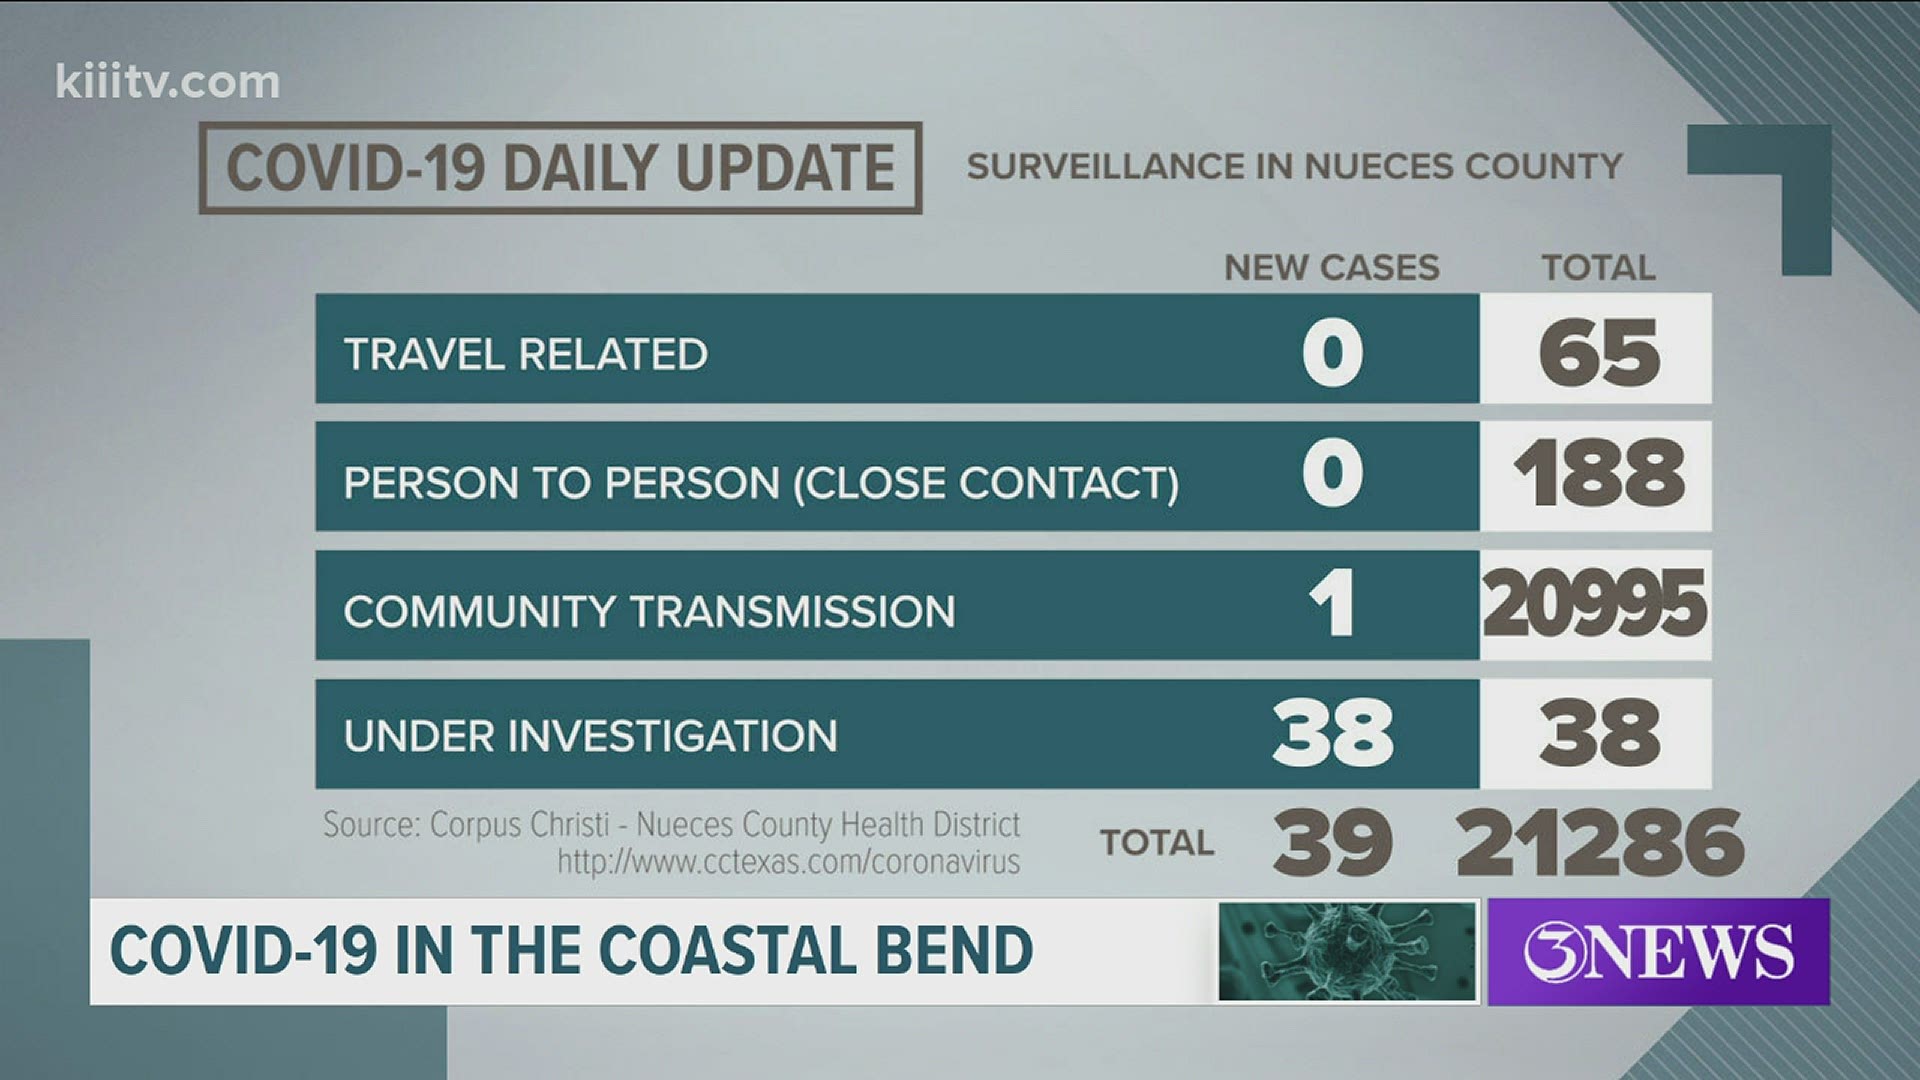 There were no COVID-19 related deaths reported in Nueces County today. Of the 39 new cases reported 1 is from the states data dump.